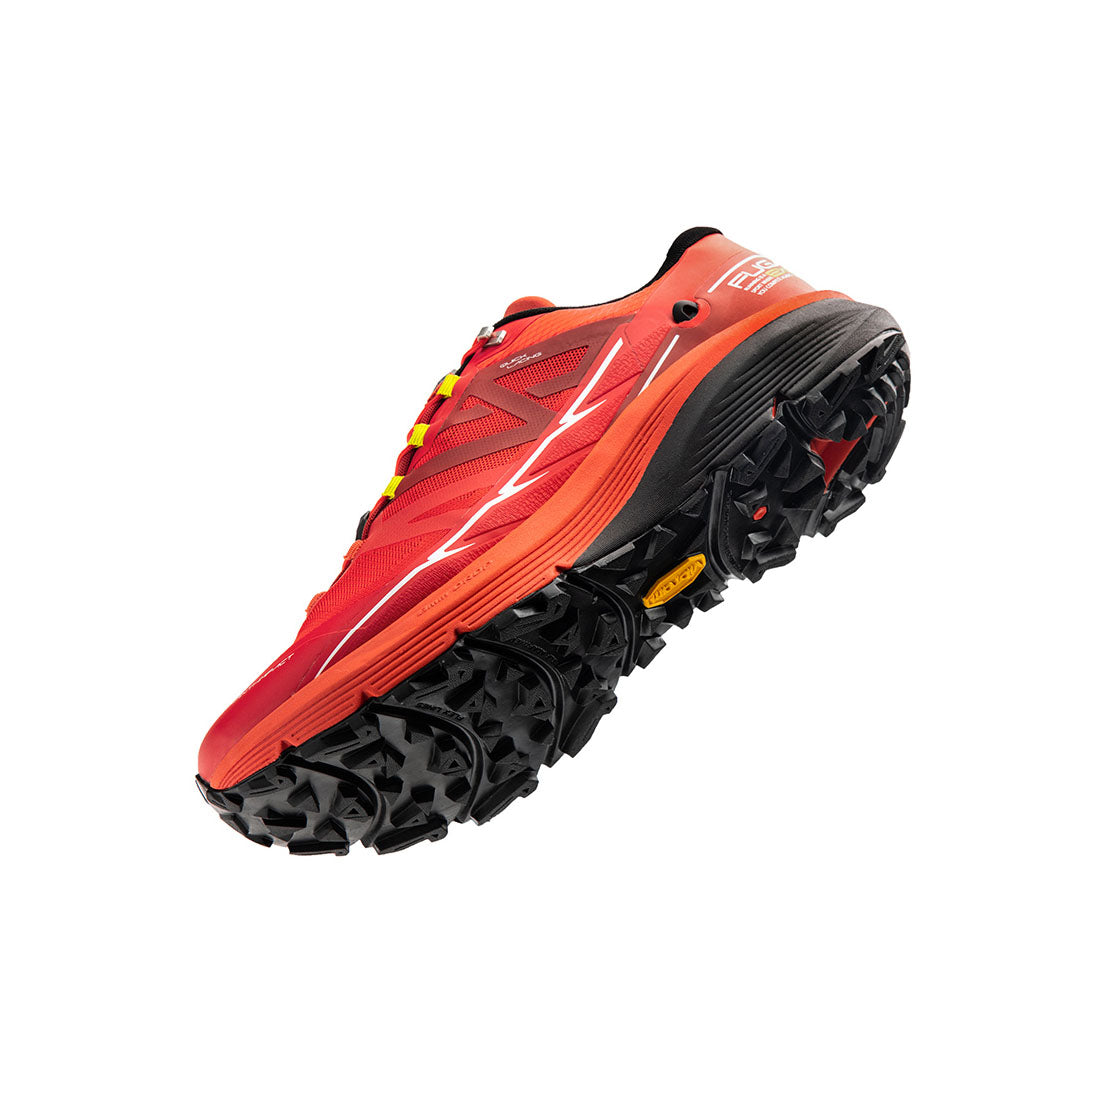 Kailas FUGA EX 2 W Trail Running Shoes Men's